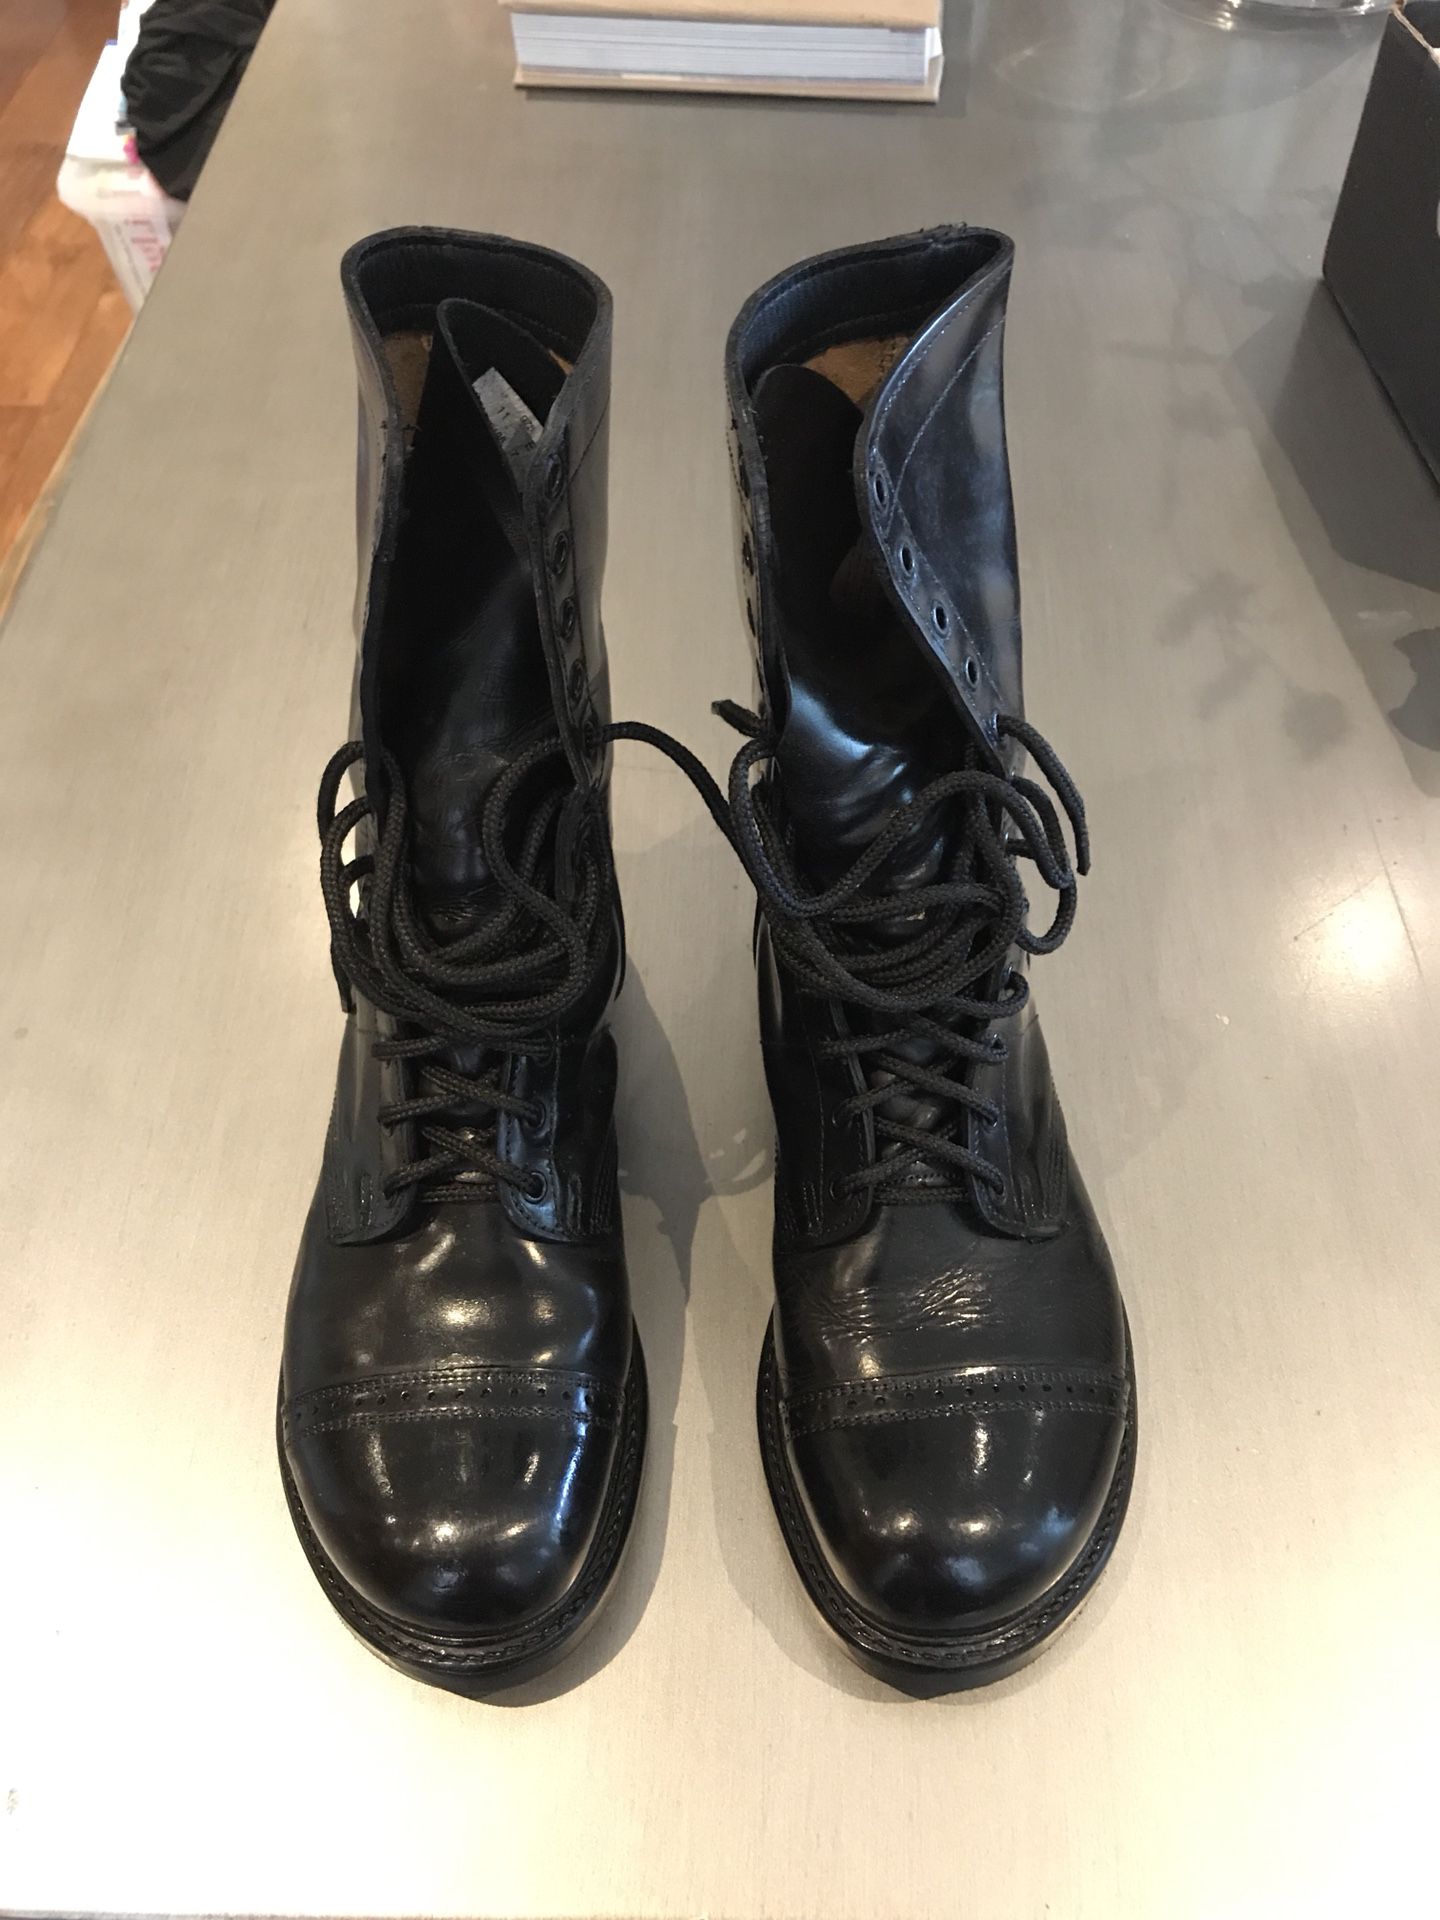 Nike Women's Canvas Boots Size 8.5 for Sale in Norwalk, CA - OfferUp